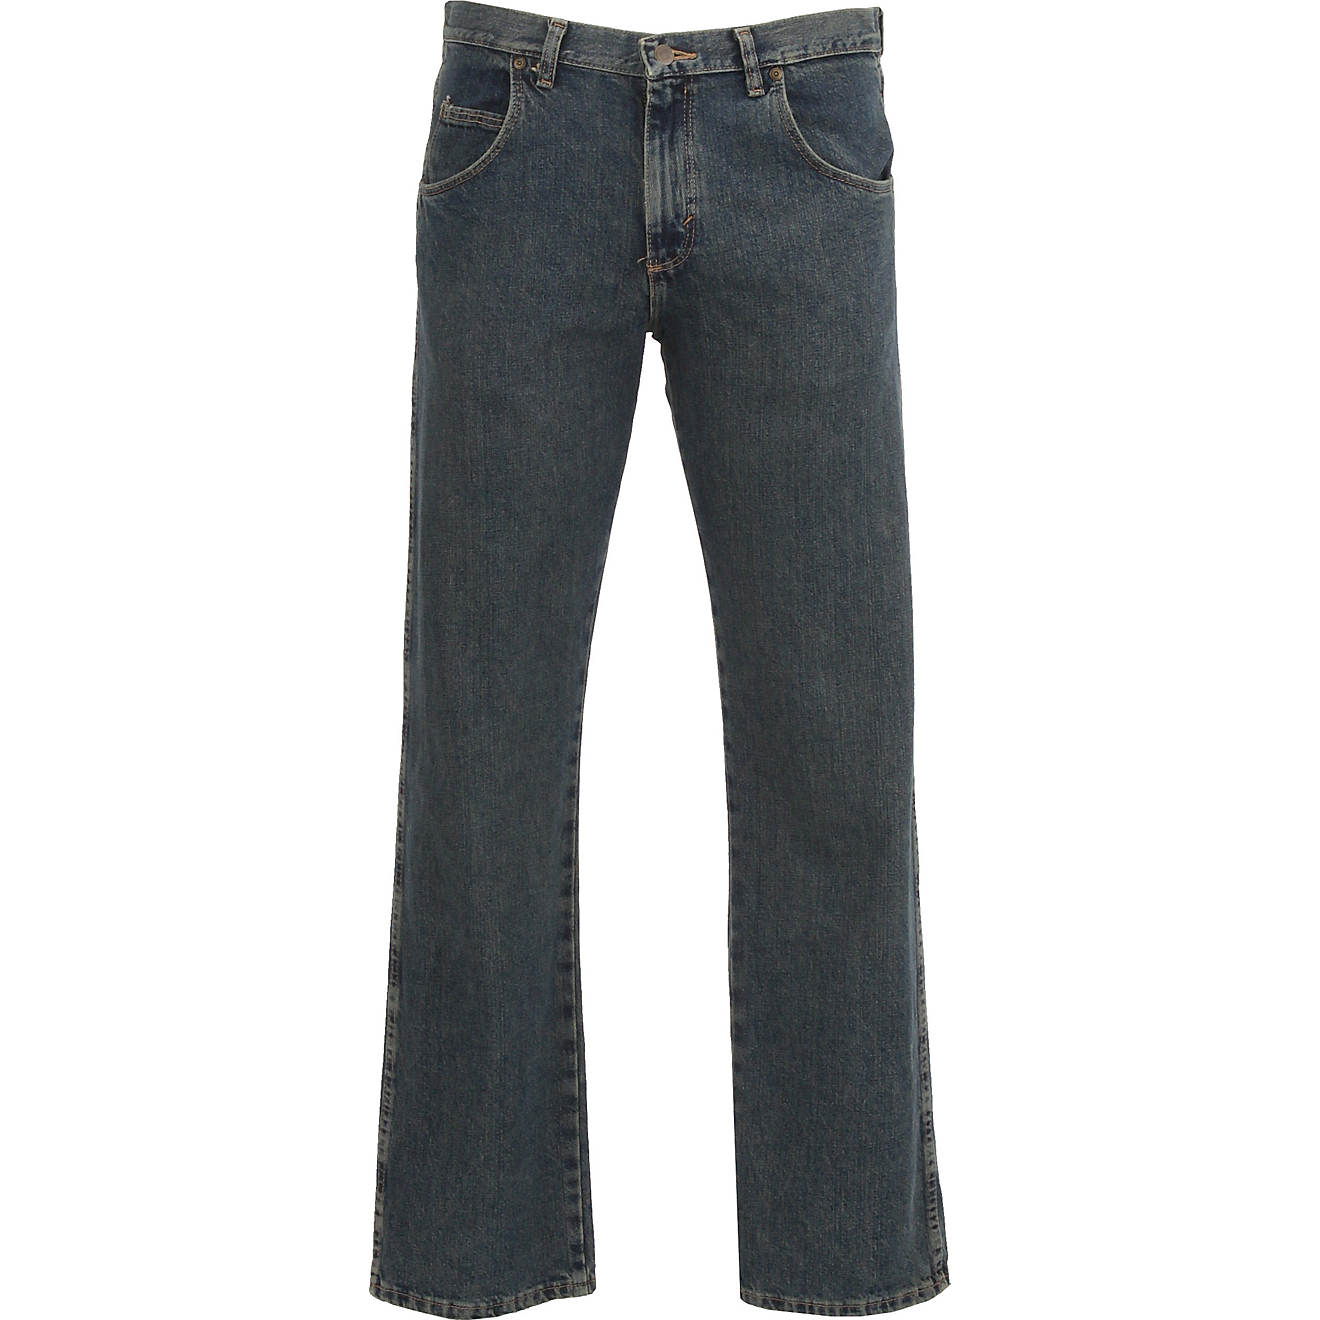 Wrangler Men's Rugged Wear Relaxed Straight Fit Jean | Academy